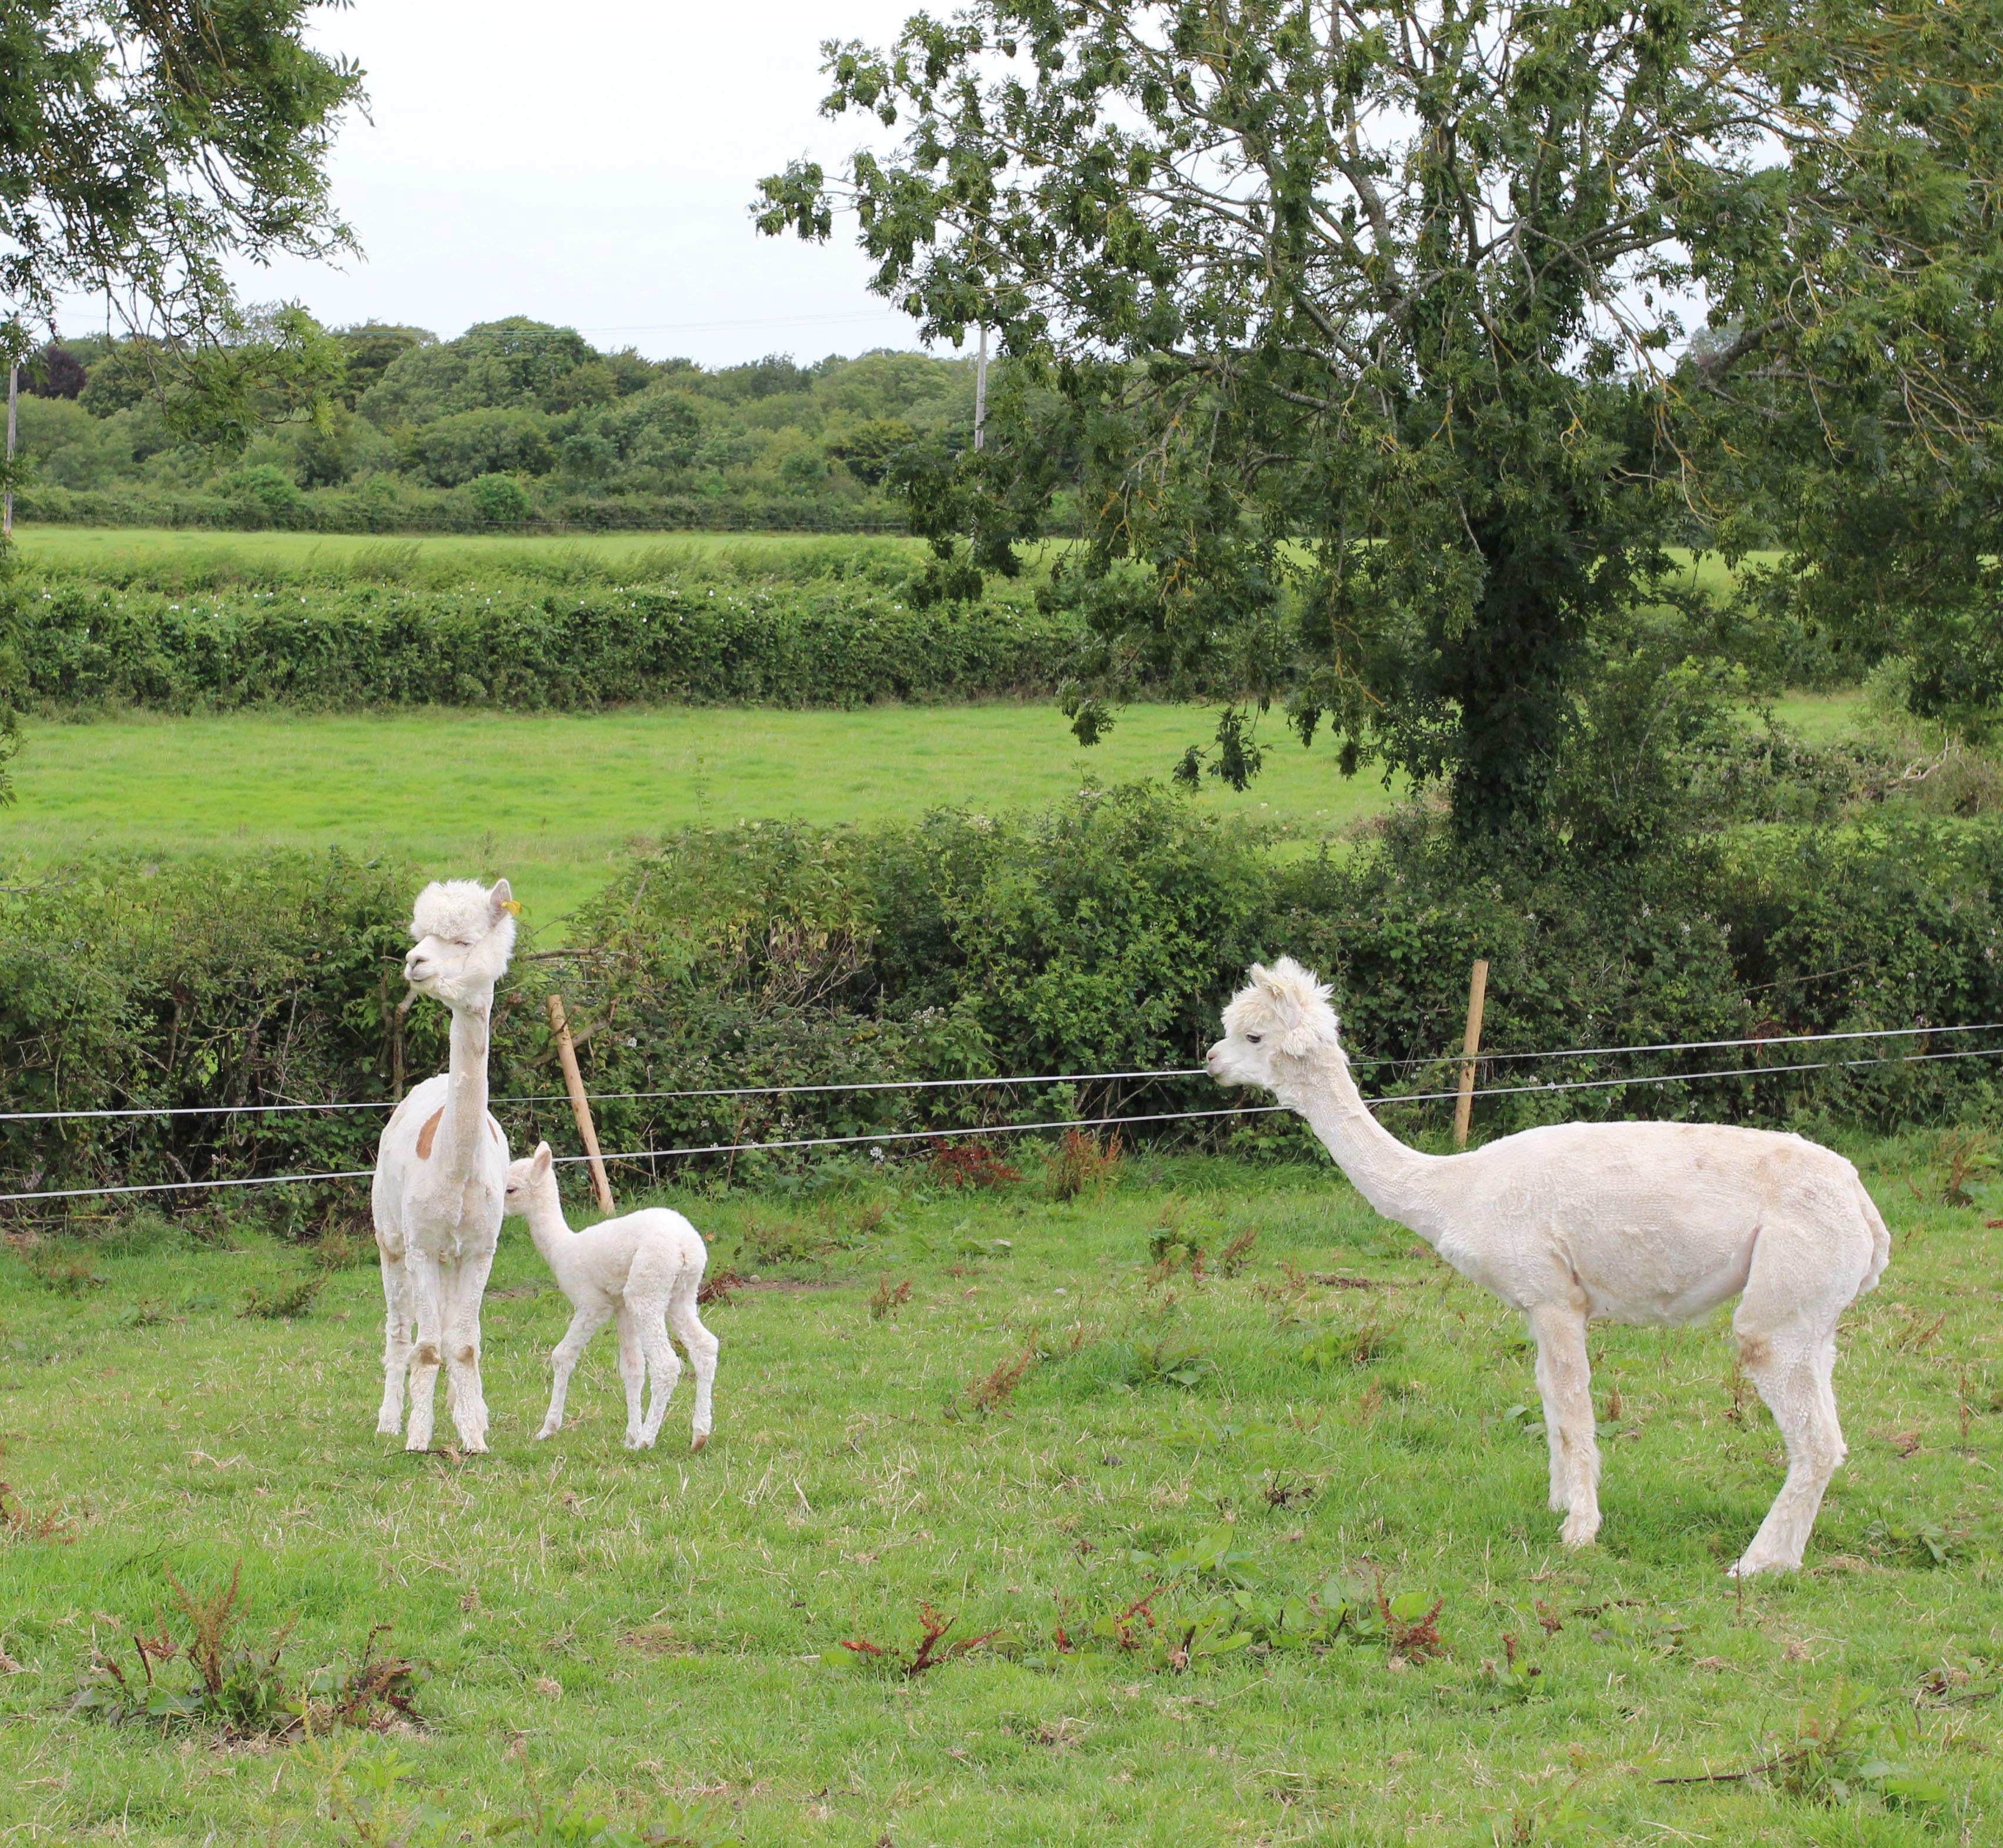 Things to do in County Tipperary, Ireland - Tearaways Pet Farm & Activity Centre - YourDaysOut - Photo 8